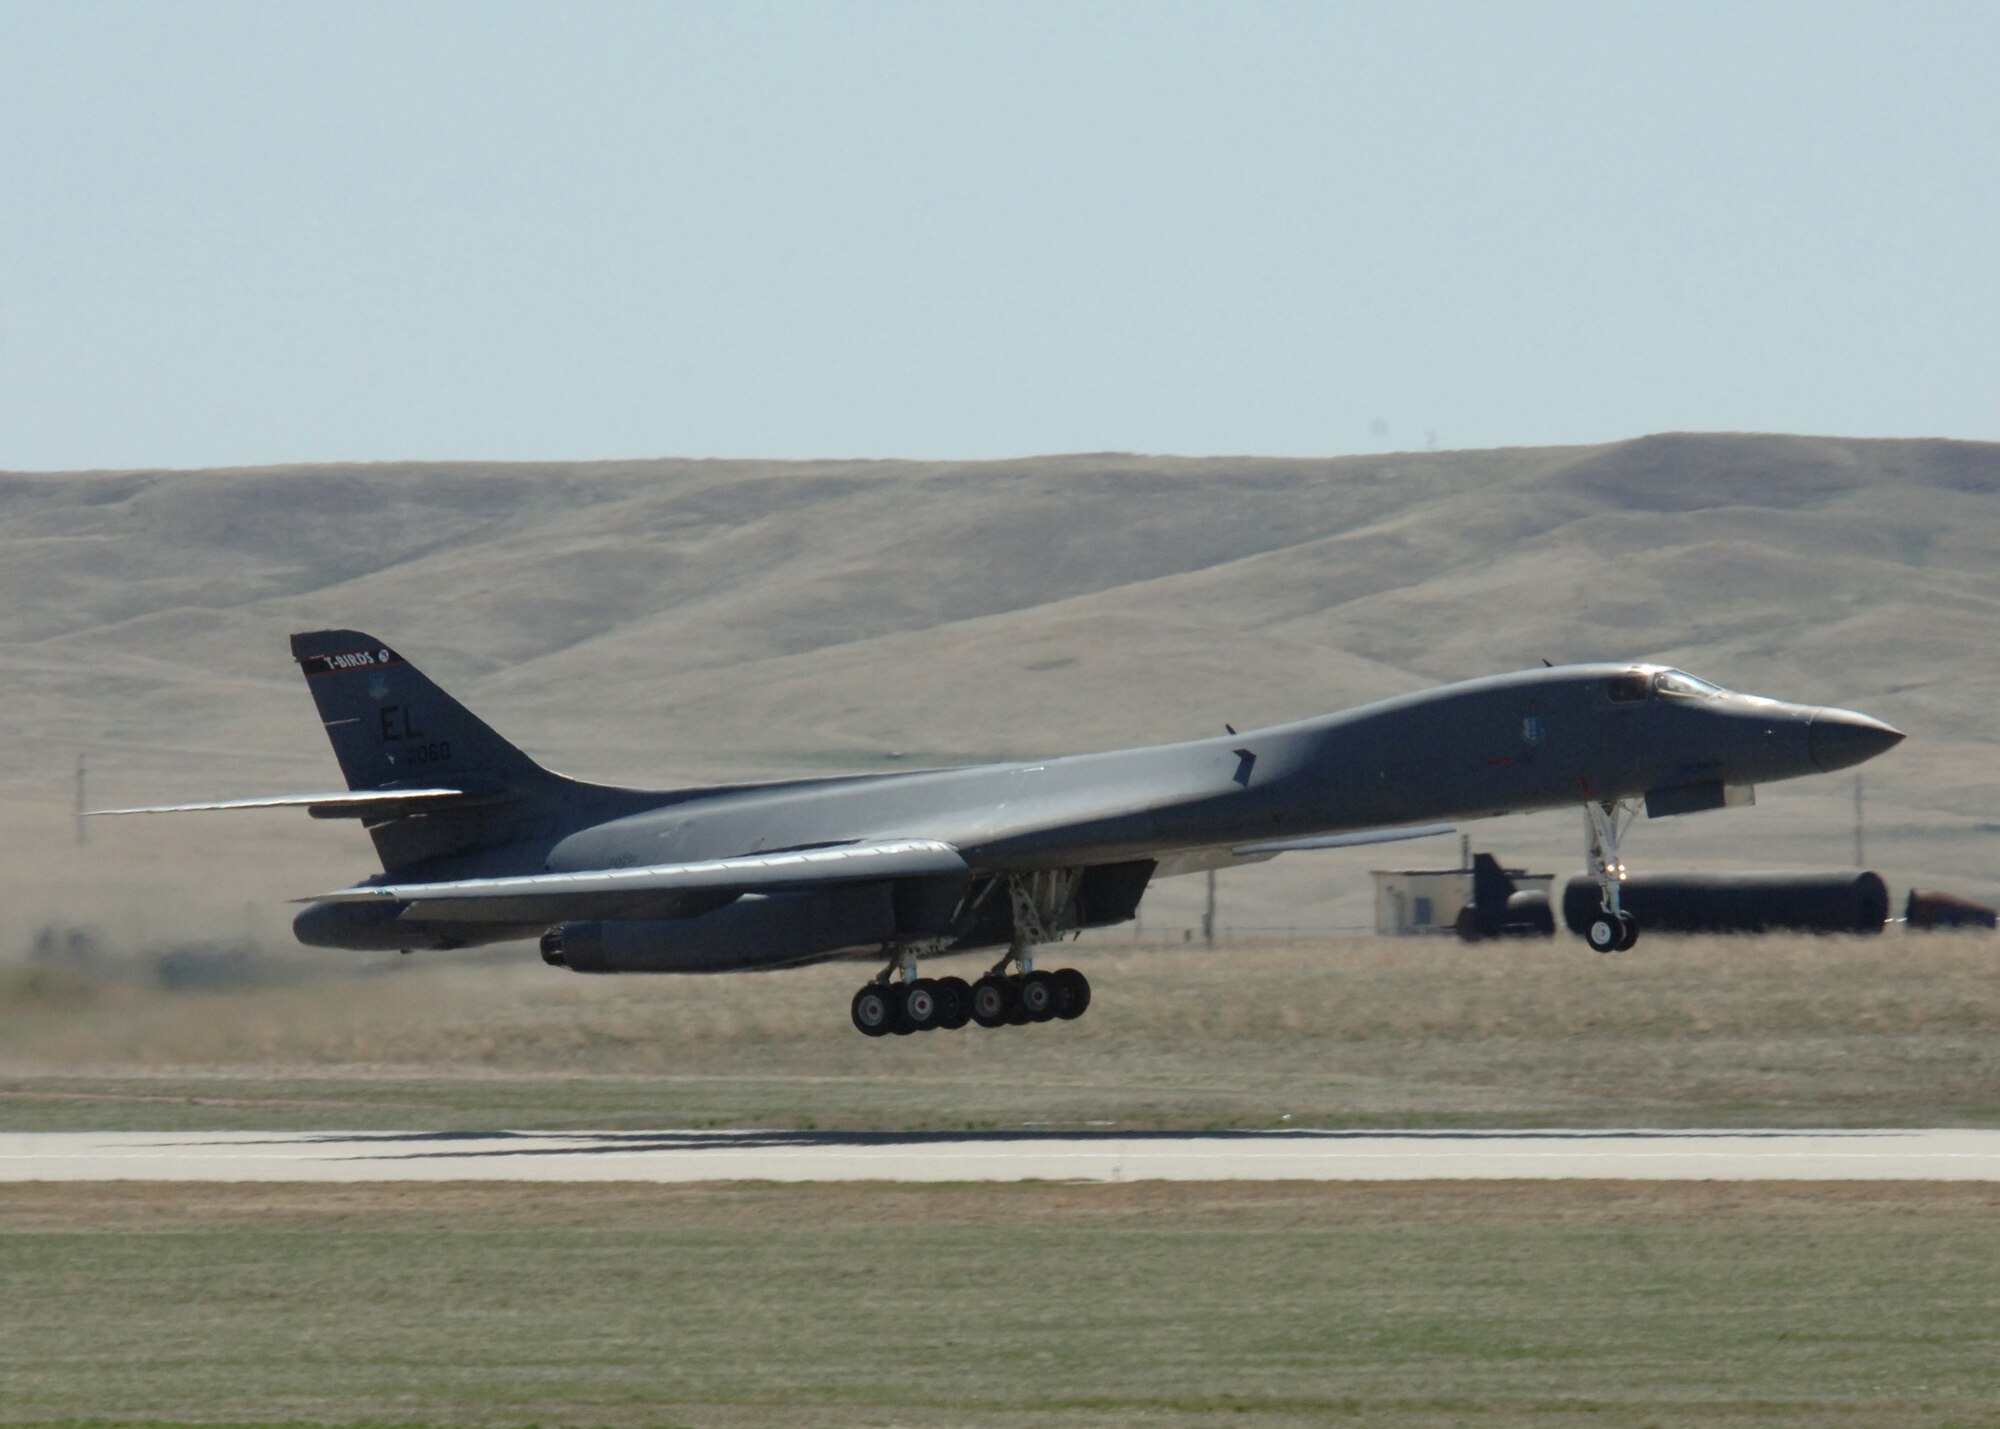 A B-1 Lancer from the 28th Bomb Wing practices "touch and go" procedures at Ellsworth Air Force Base, S.D., on Thursday, April 13, 2006. (U.S. Air Force photo/Airman Angela Ruiz) 

